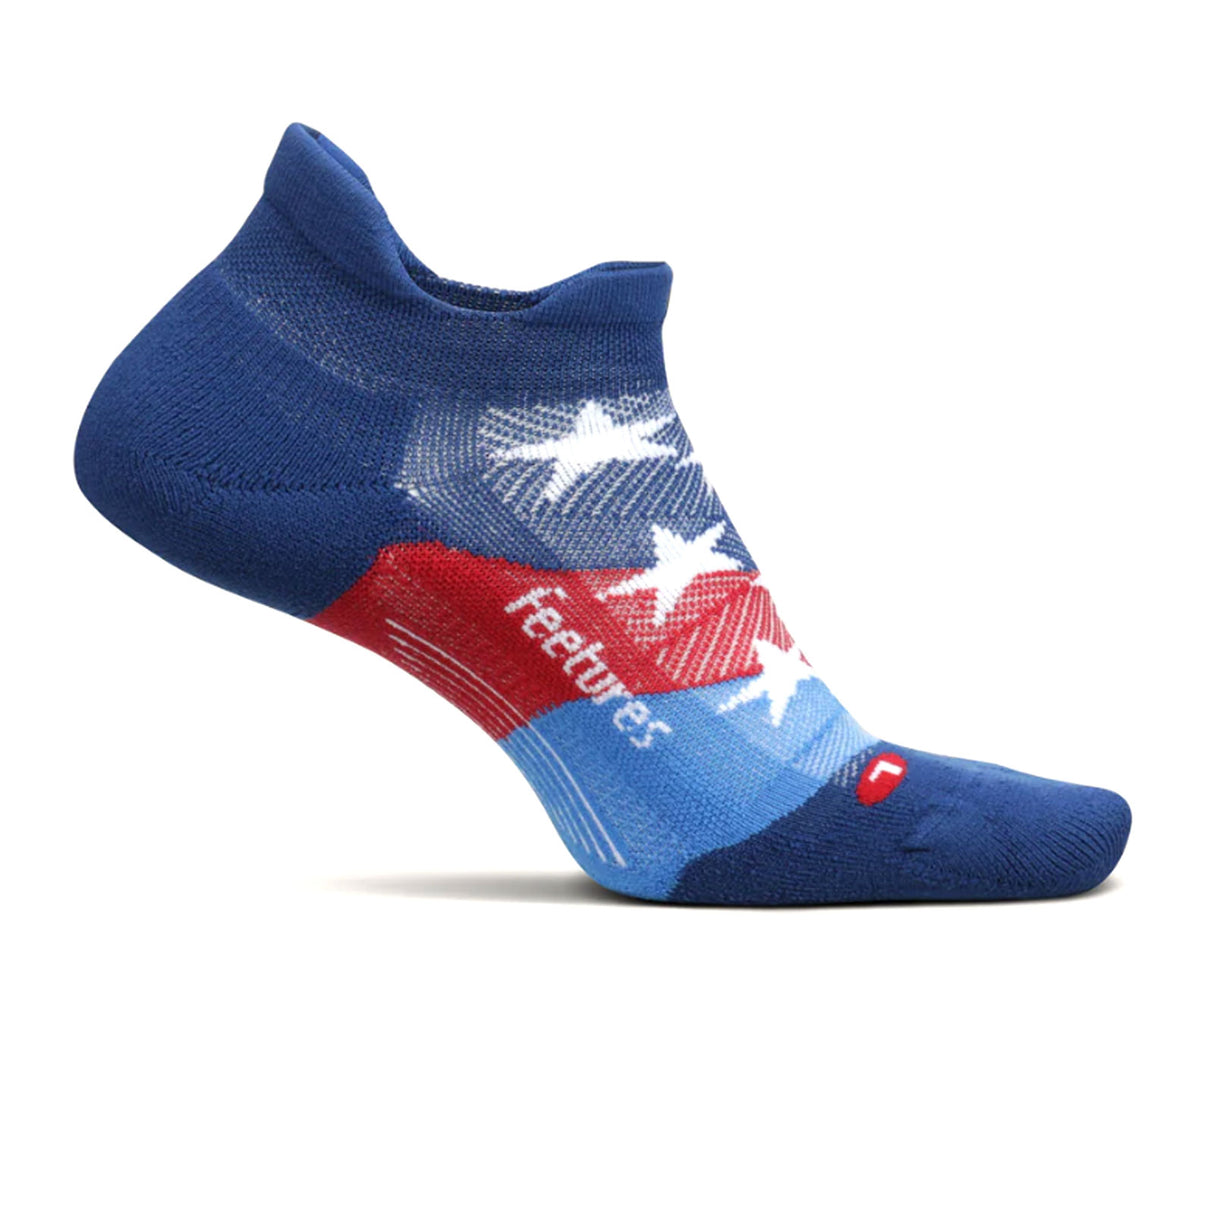 Feetures Elite Light Cushion No Show Tab Sock (Unisex) - Limited Edition Stars and Stripes Socks - Life - No Show - The Heel Shoe Fitters